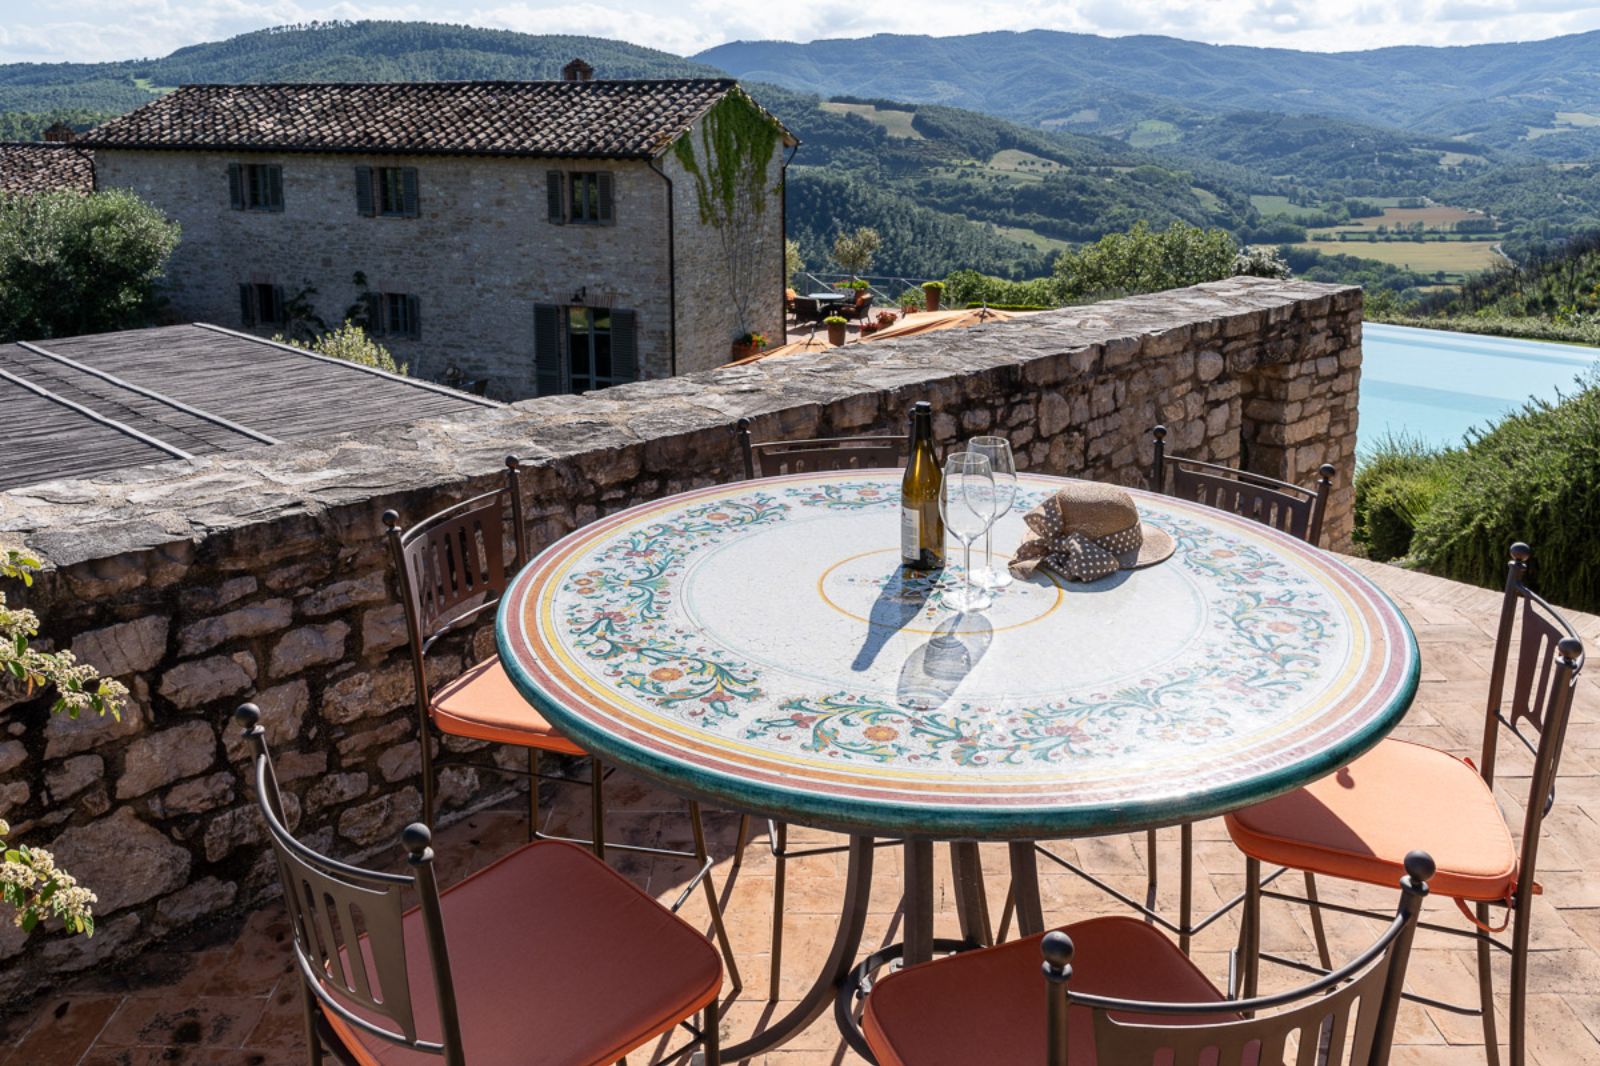 Outdoor seating at La Cascinale with countryside views